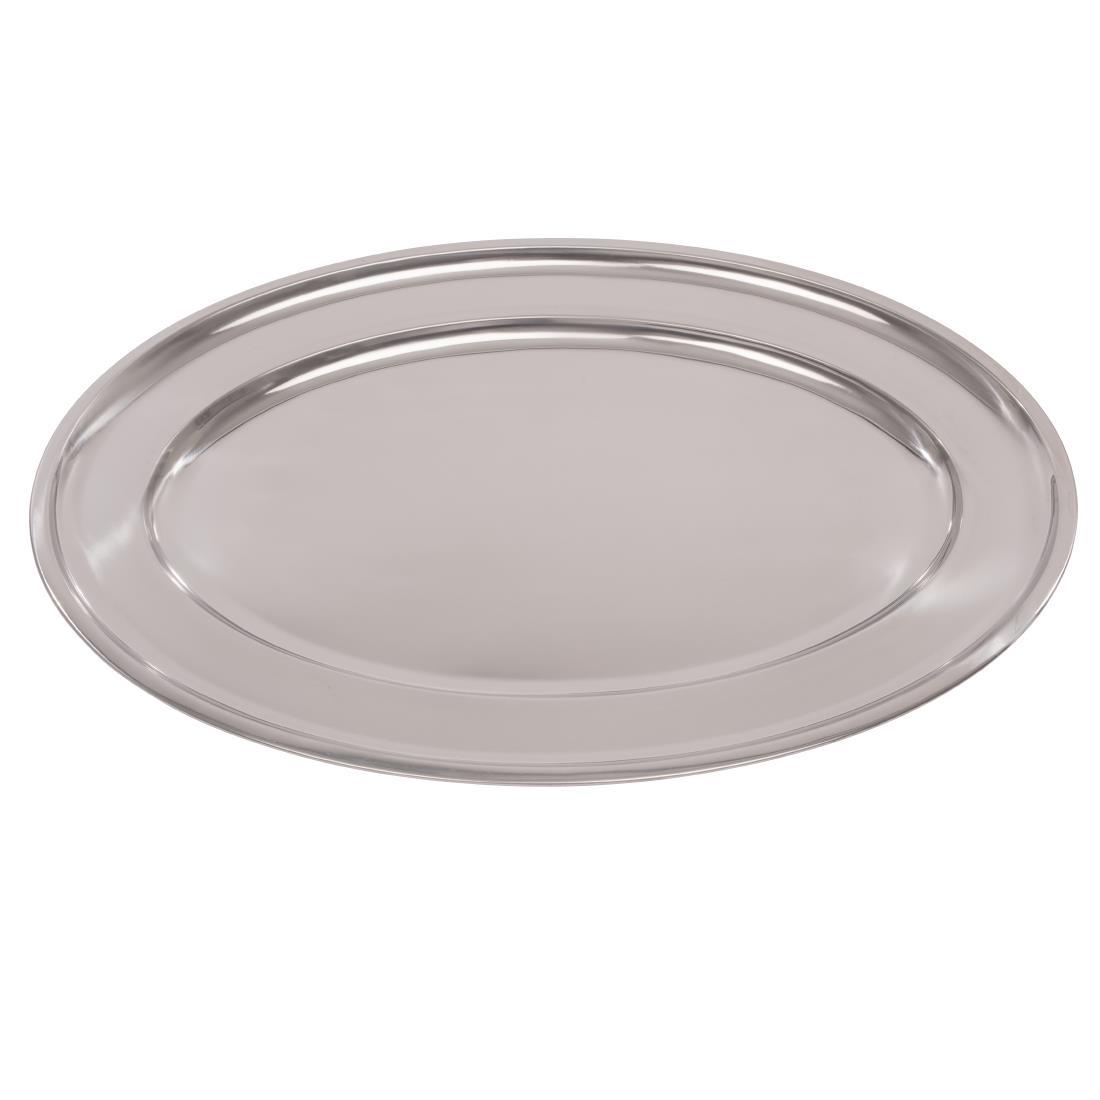 Olympia Stainless Steel Oval Serving Tray 605mm - K369  - 2